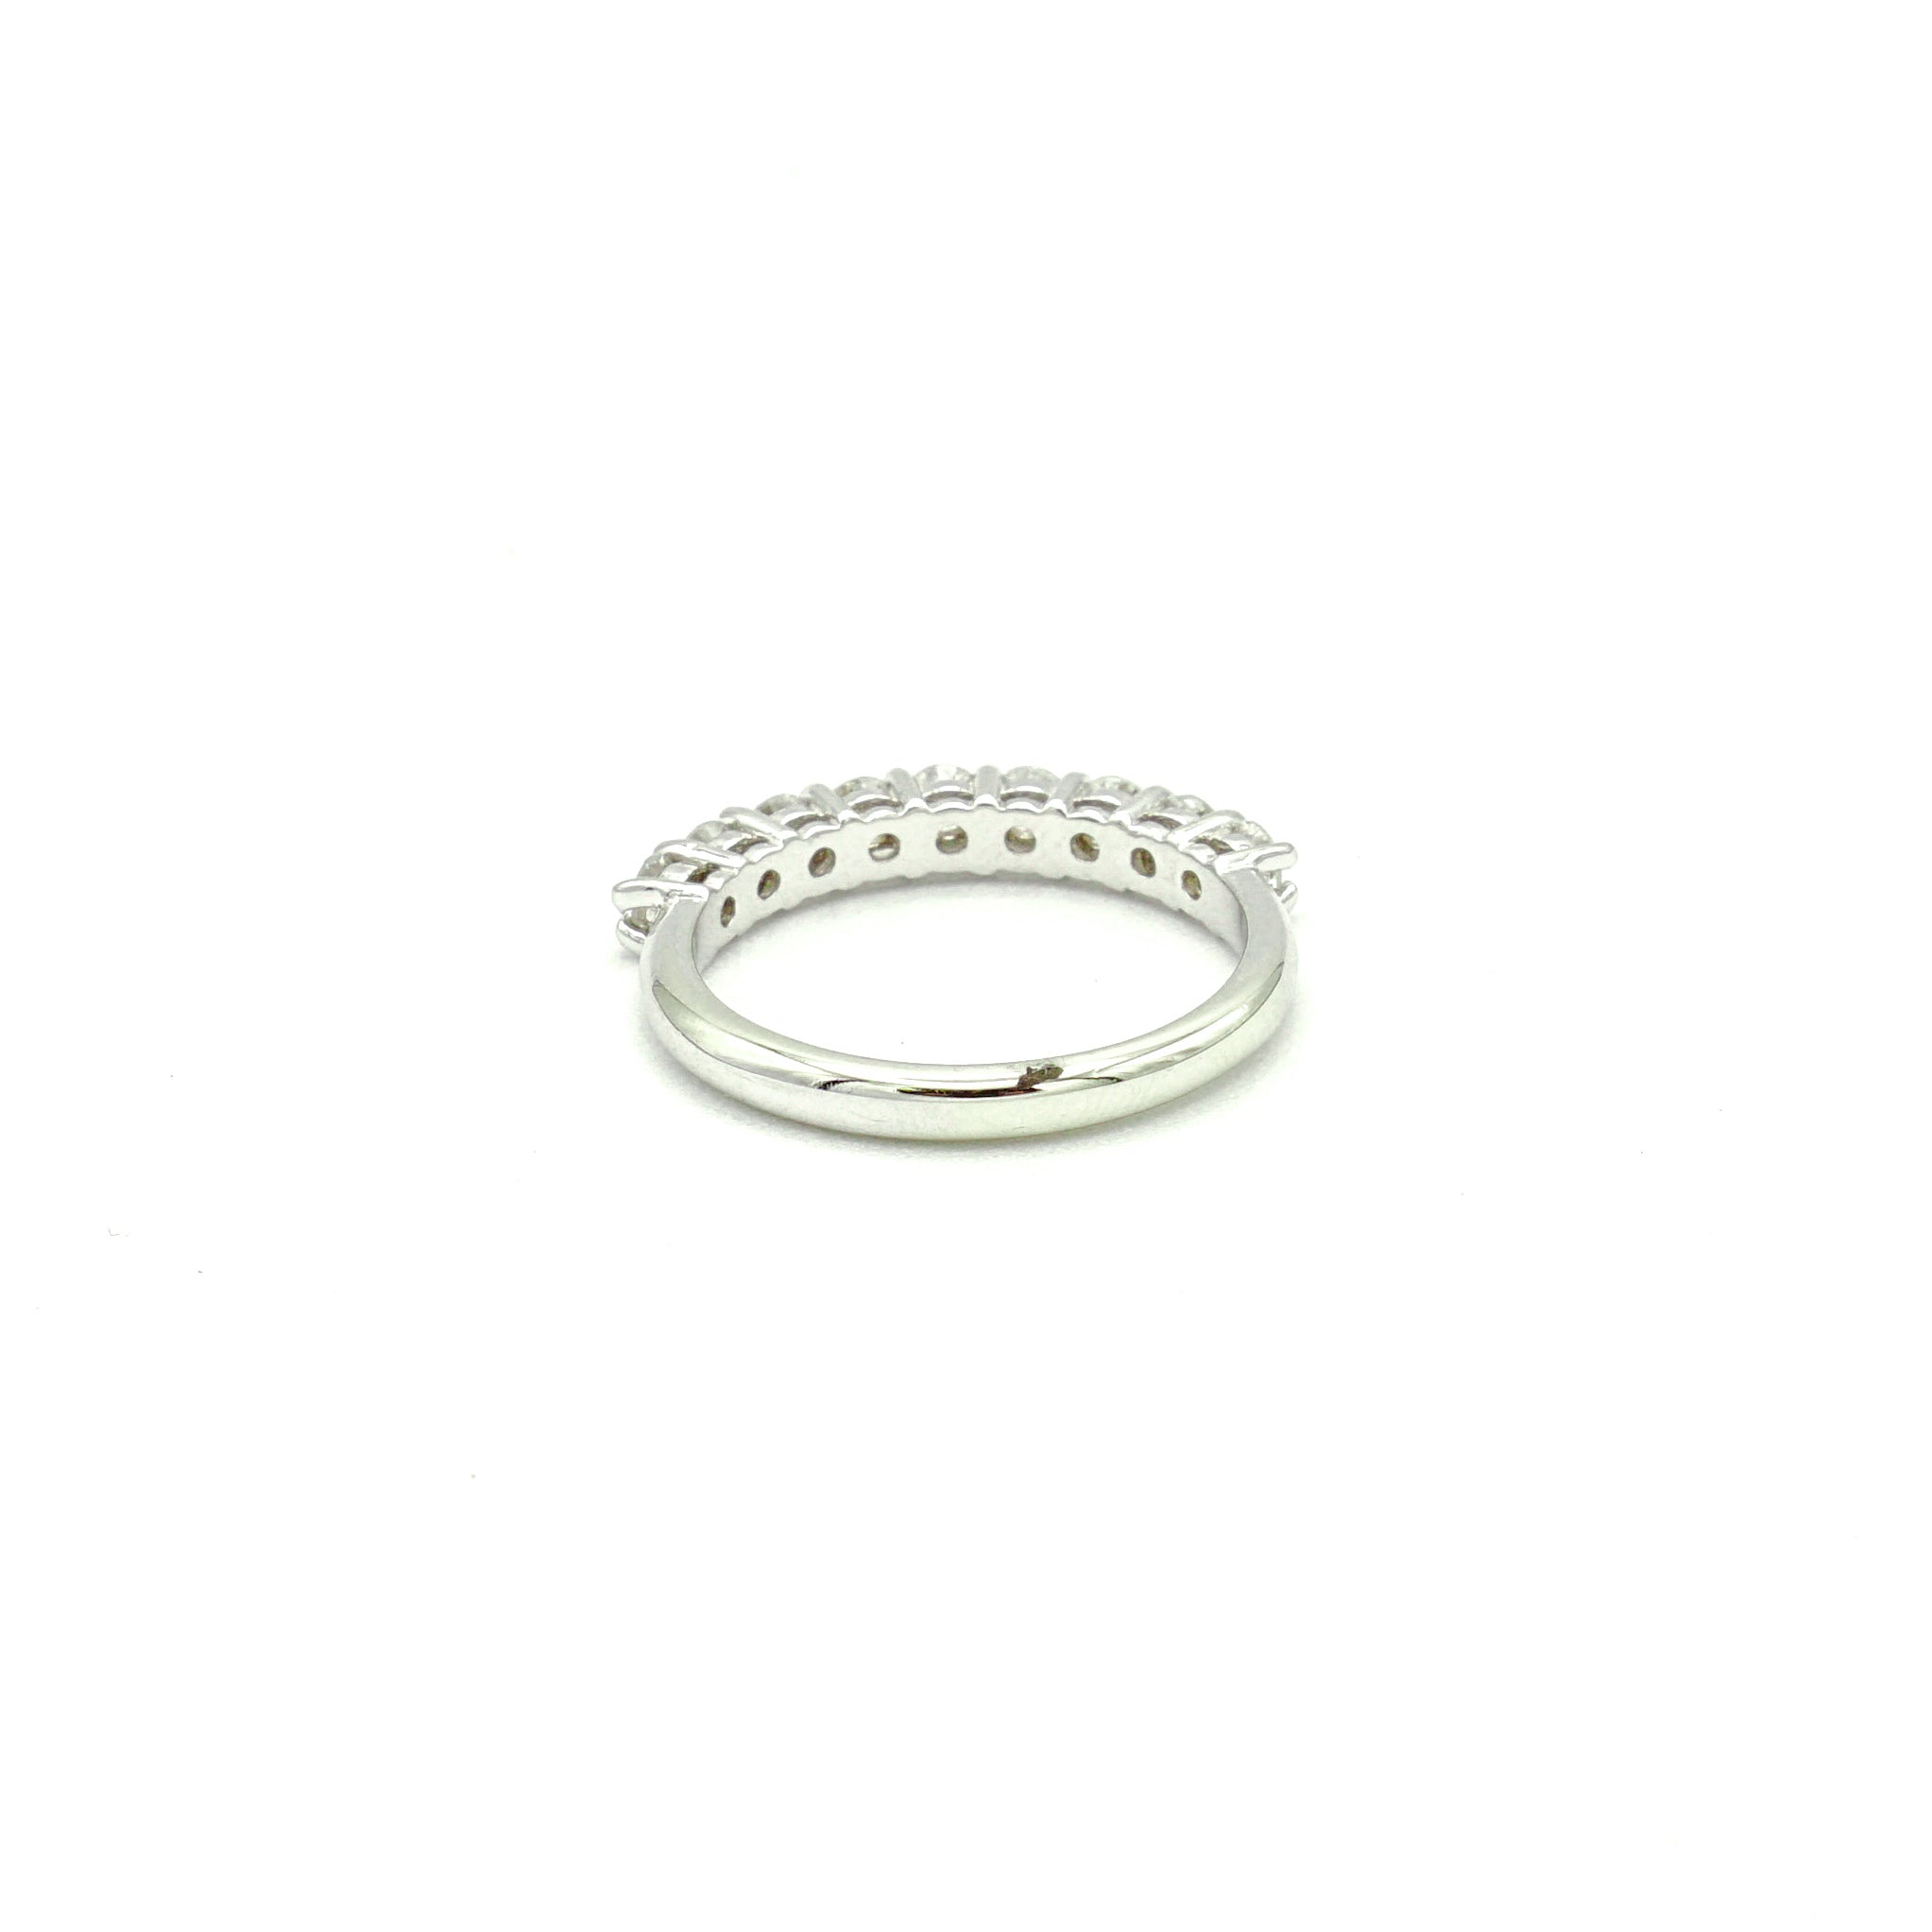 14k White Gold 9 Round Diamond  Band. - Le Vive Jewelry in Riverside